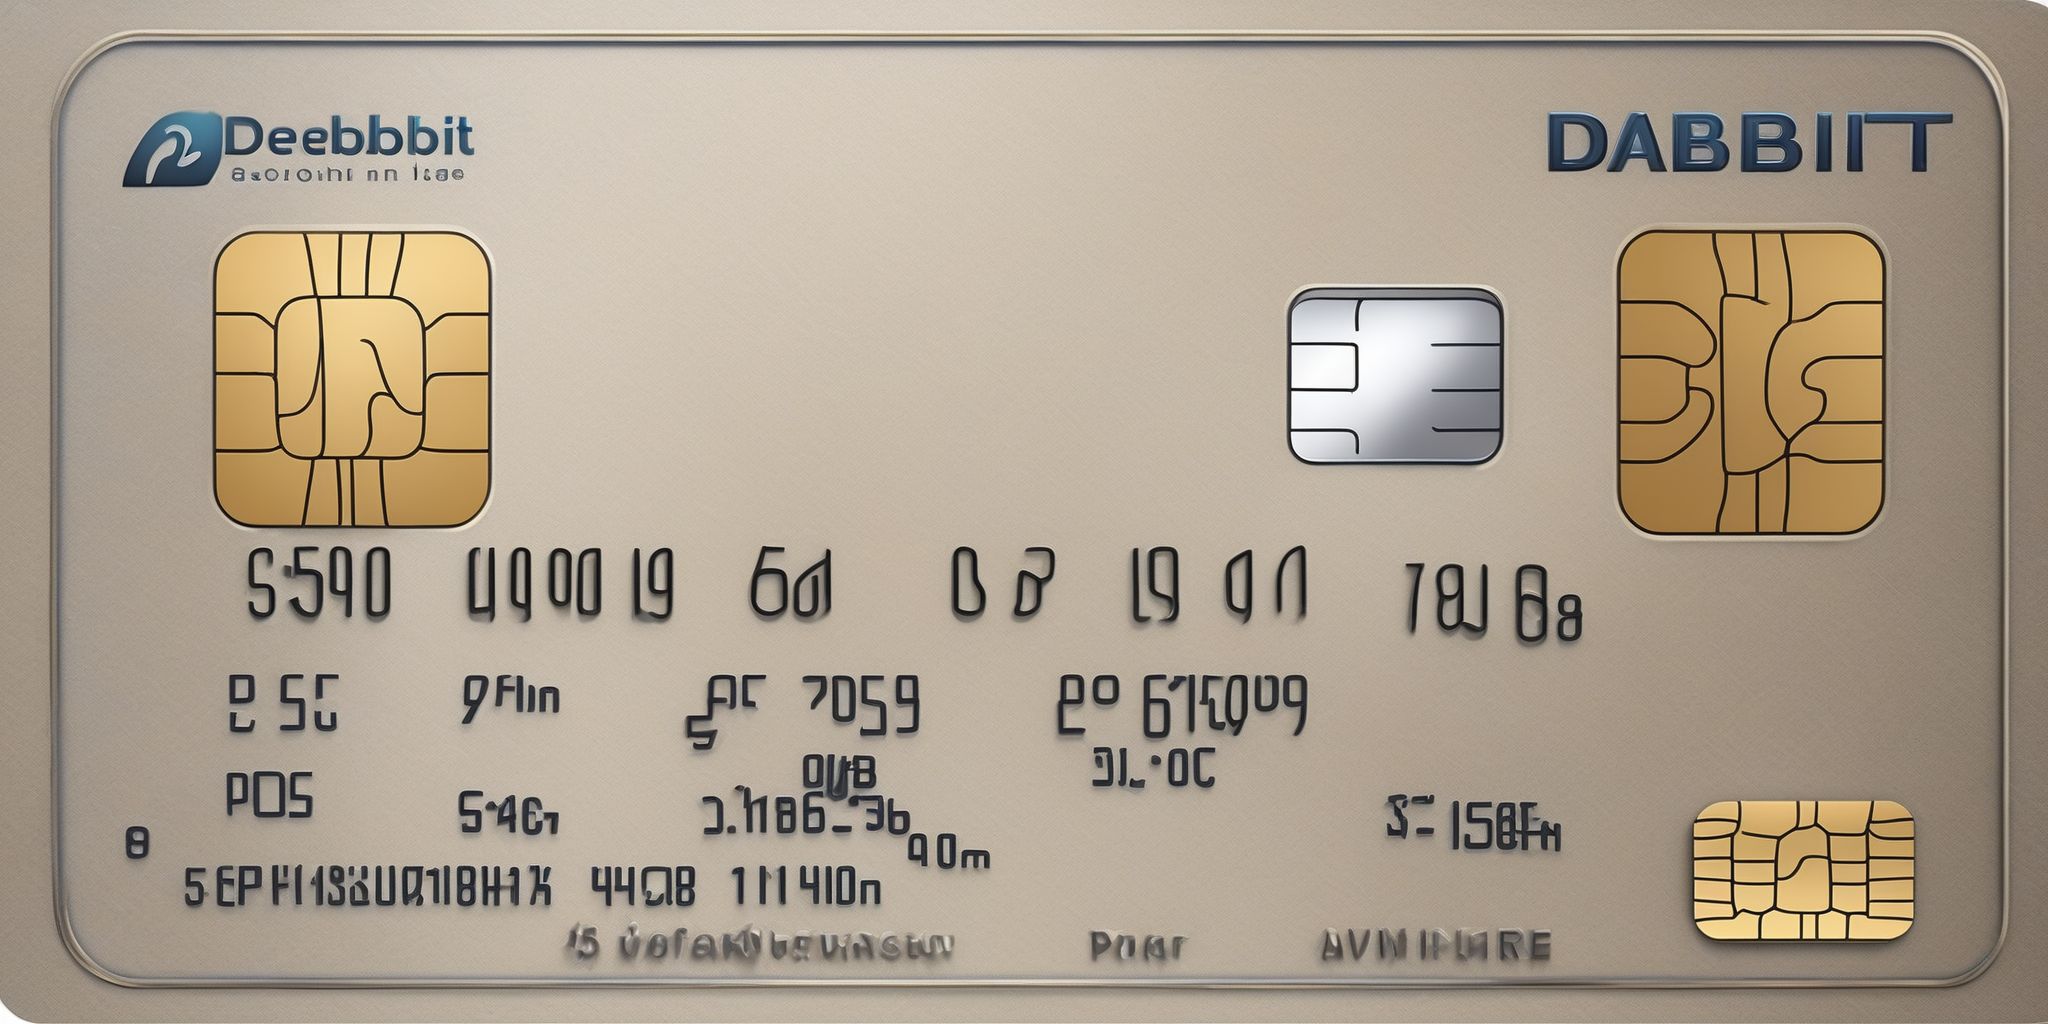 Debit card  in realistic, photographic style